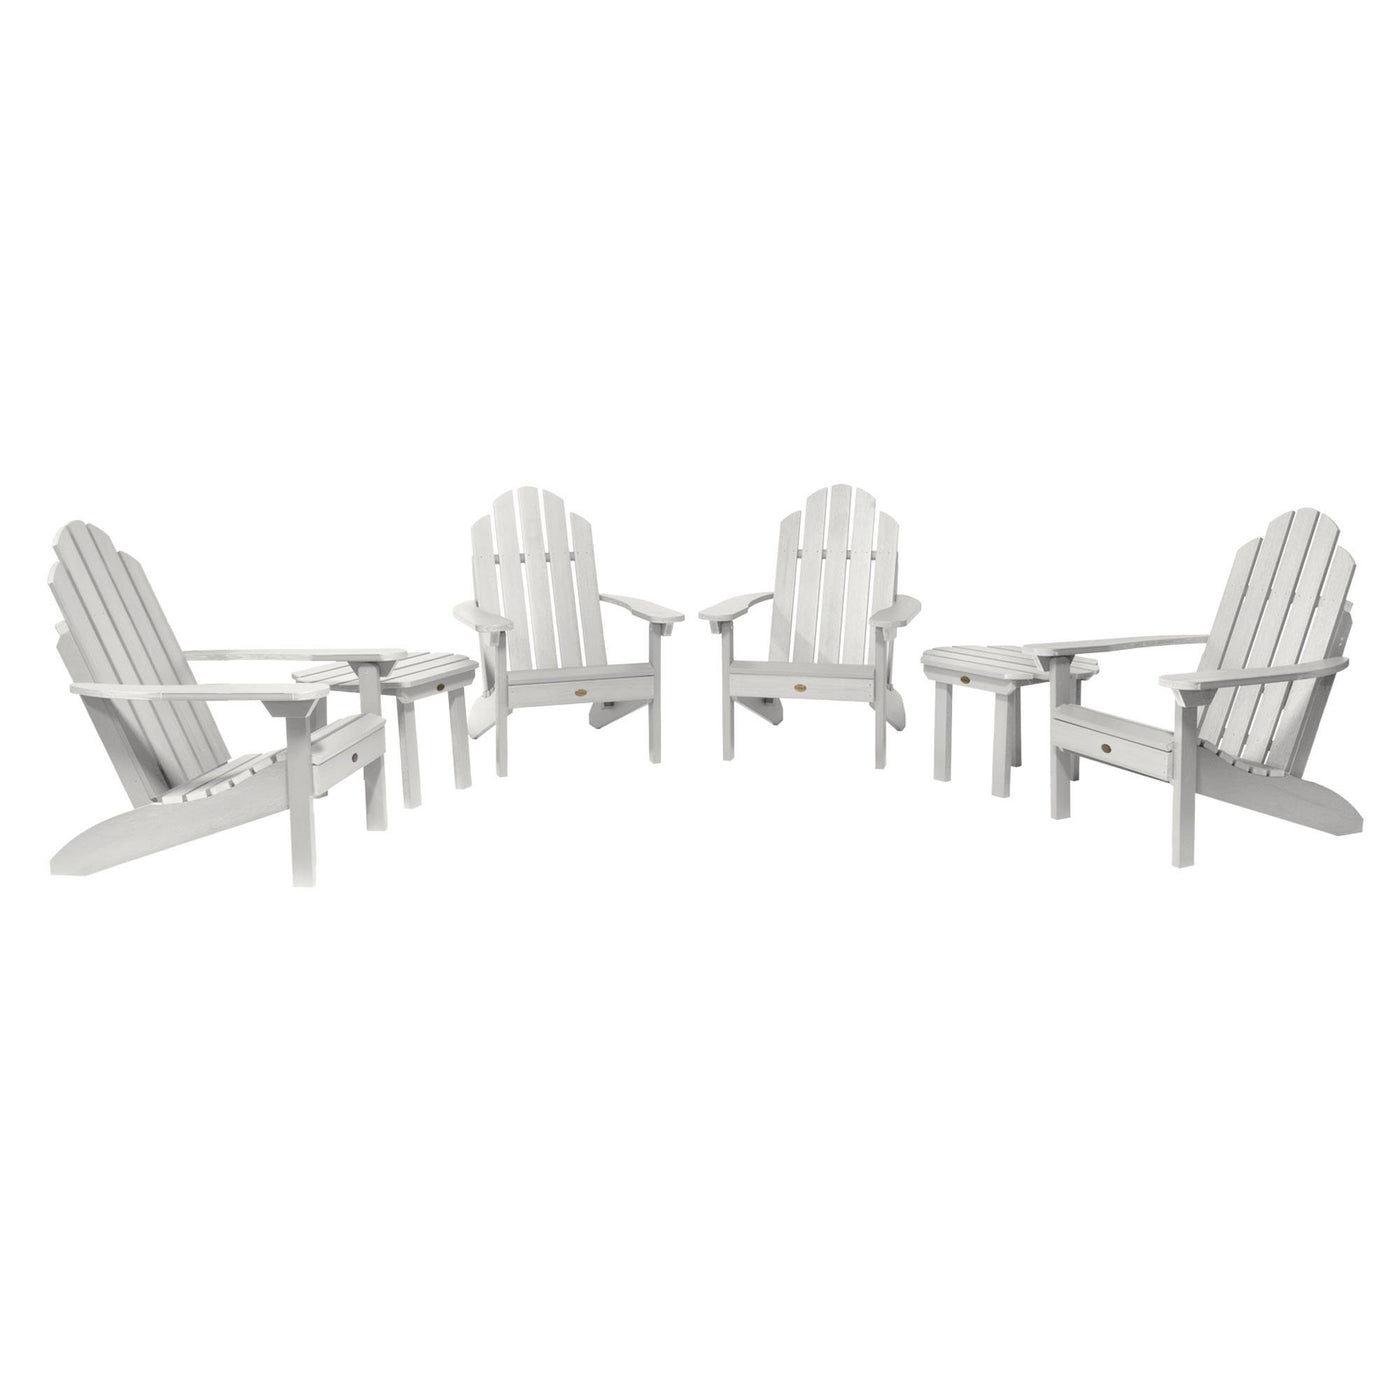 4 Classic Westport Adirondack Chairs with 2 Side Tables Highwood USA White 